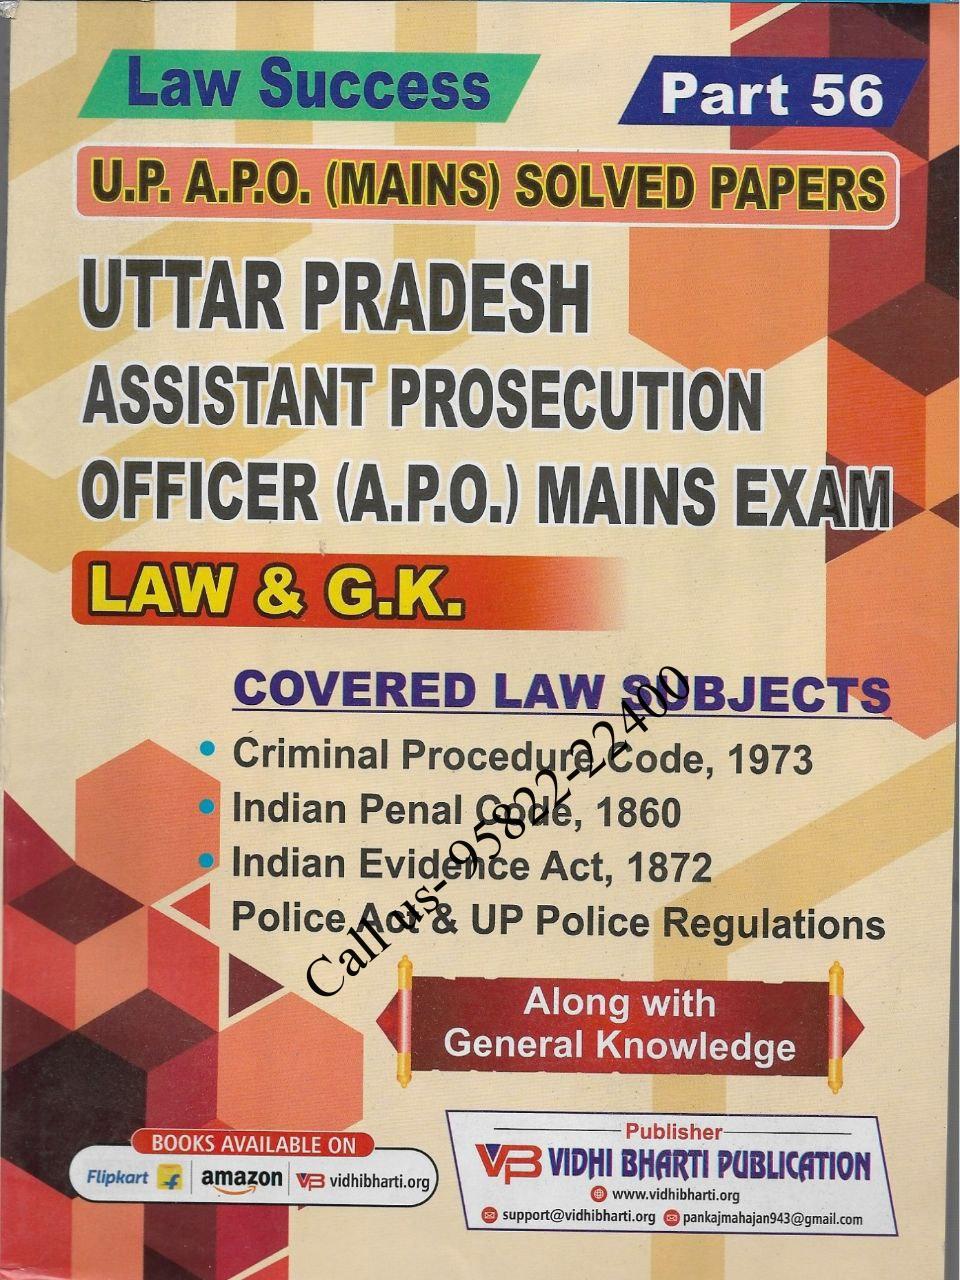 UP APO Mains Solved Papers along-with Law & GK [Law Success] Vidhi Bharti